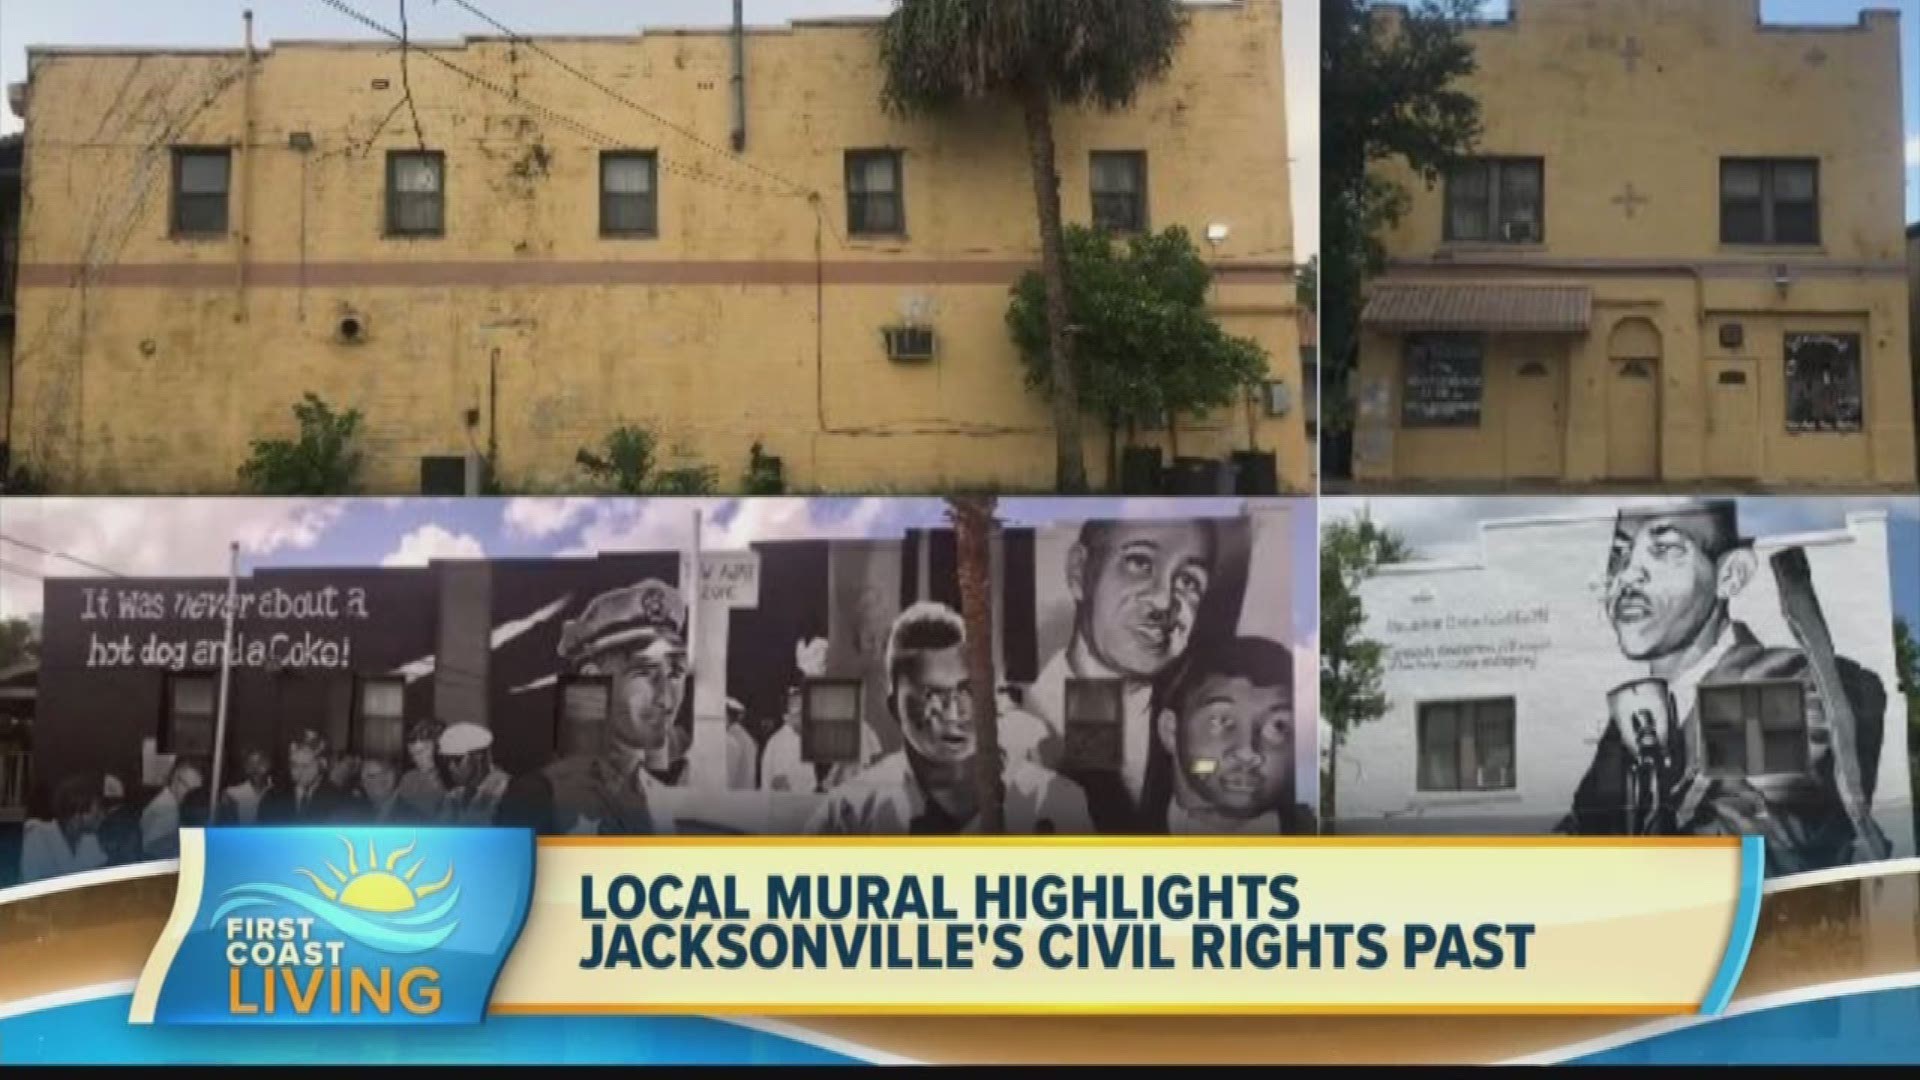 Have you seen the mural? It highlights Jacksonville's civil rights past.